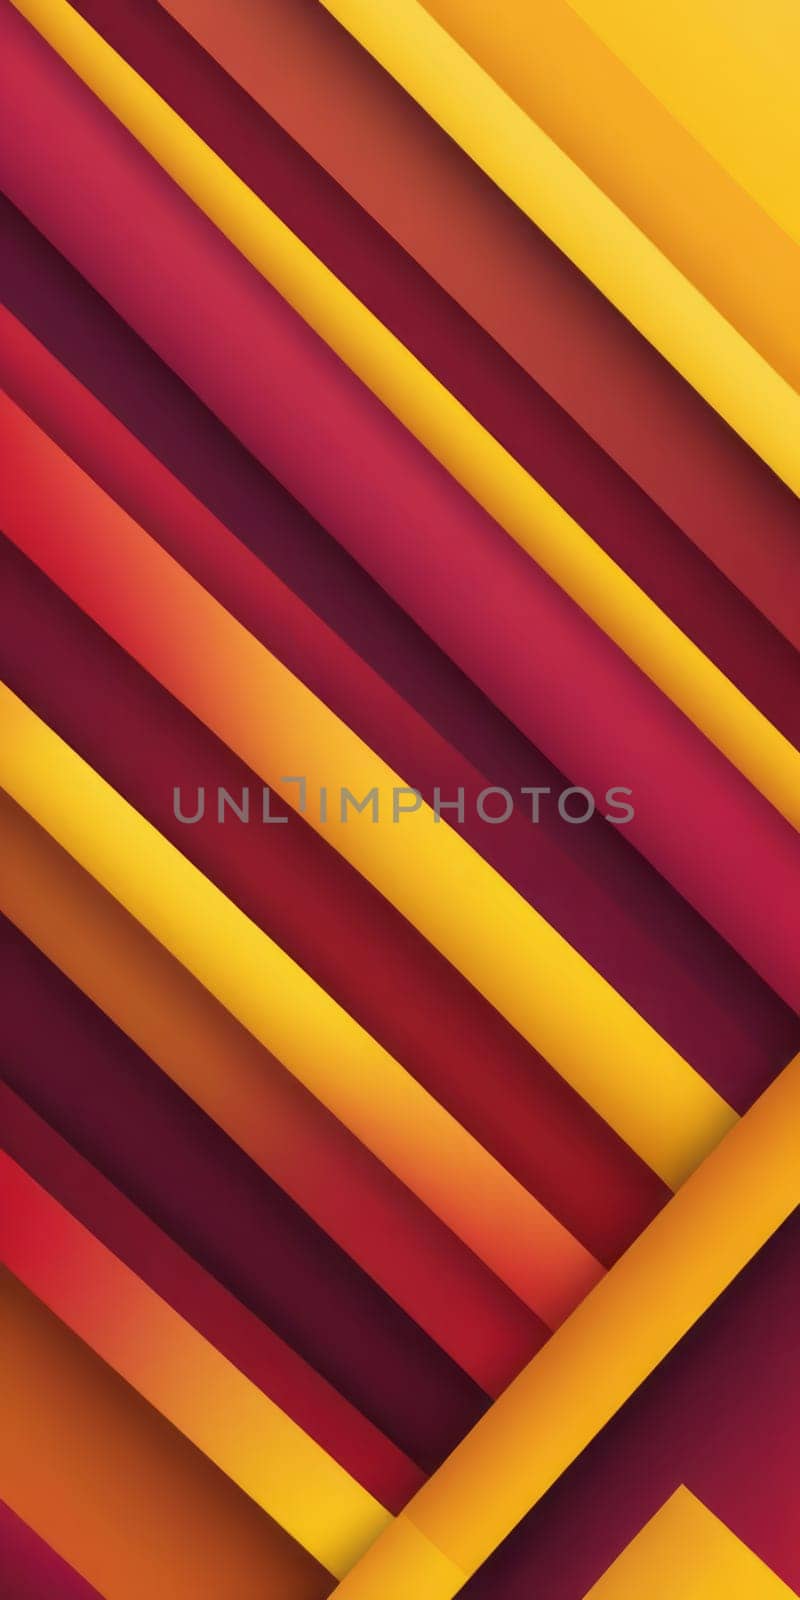 Multilobed Shapes in Maroon and Yellow by nkotlyar